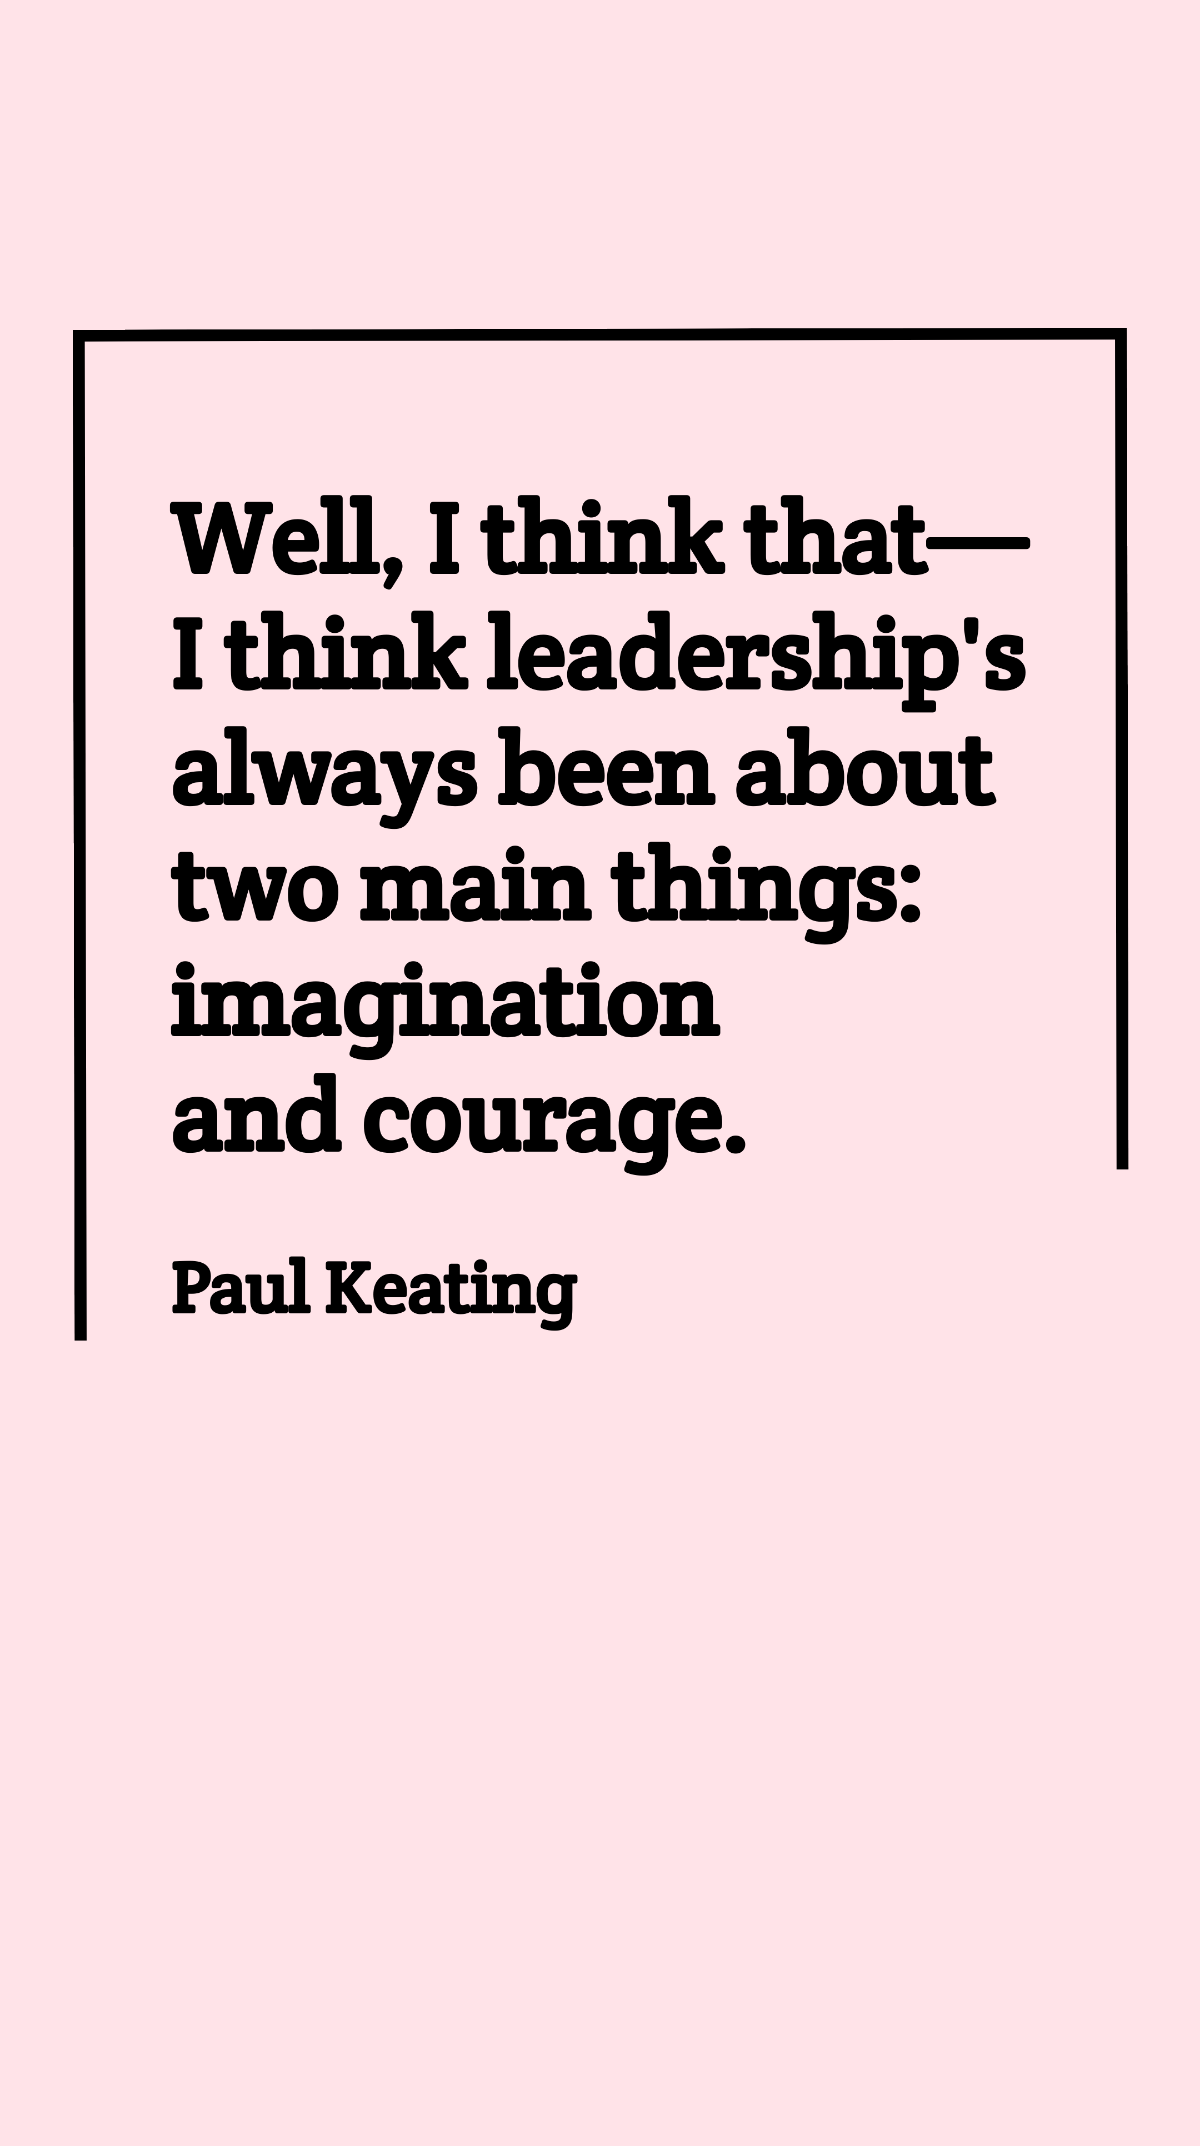 Paul Keating - Well, I think that - I think leadership's always been about two main things: imagination and courage. Template